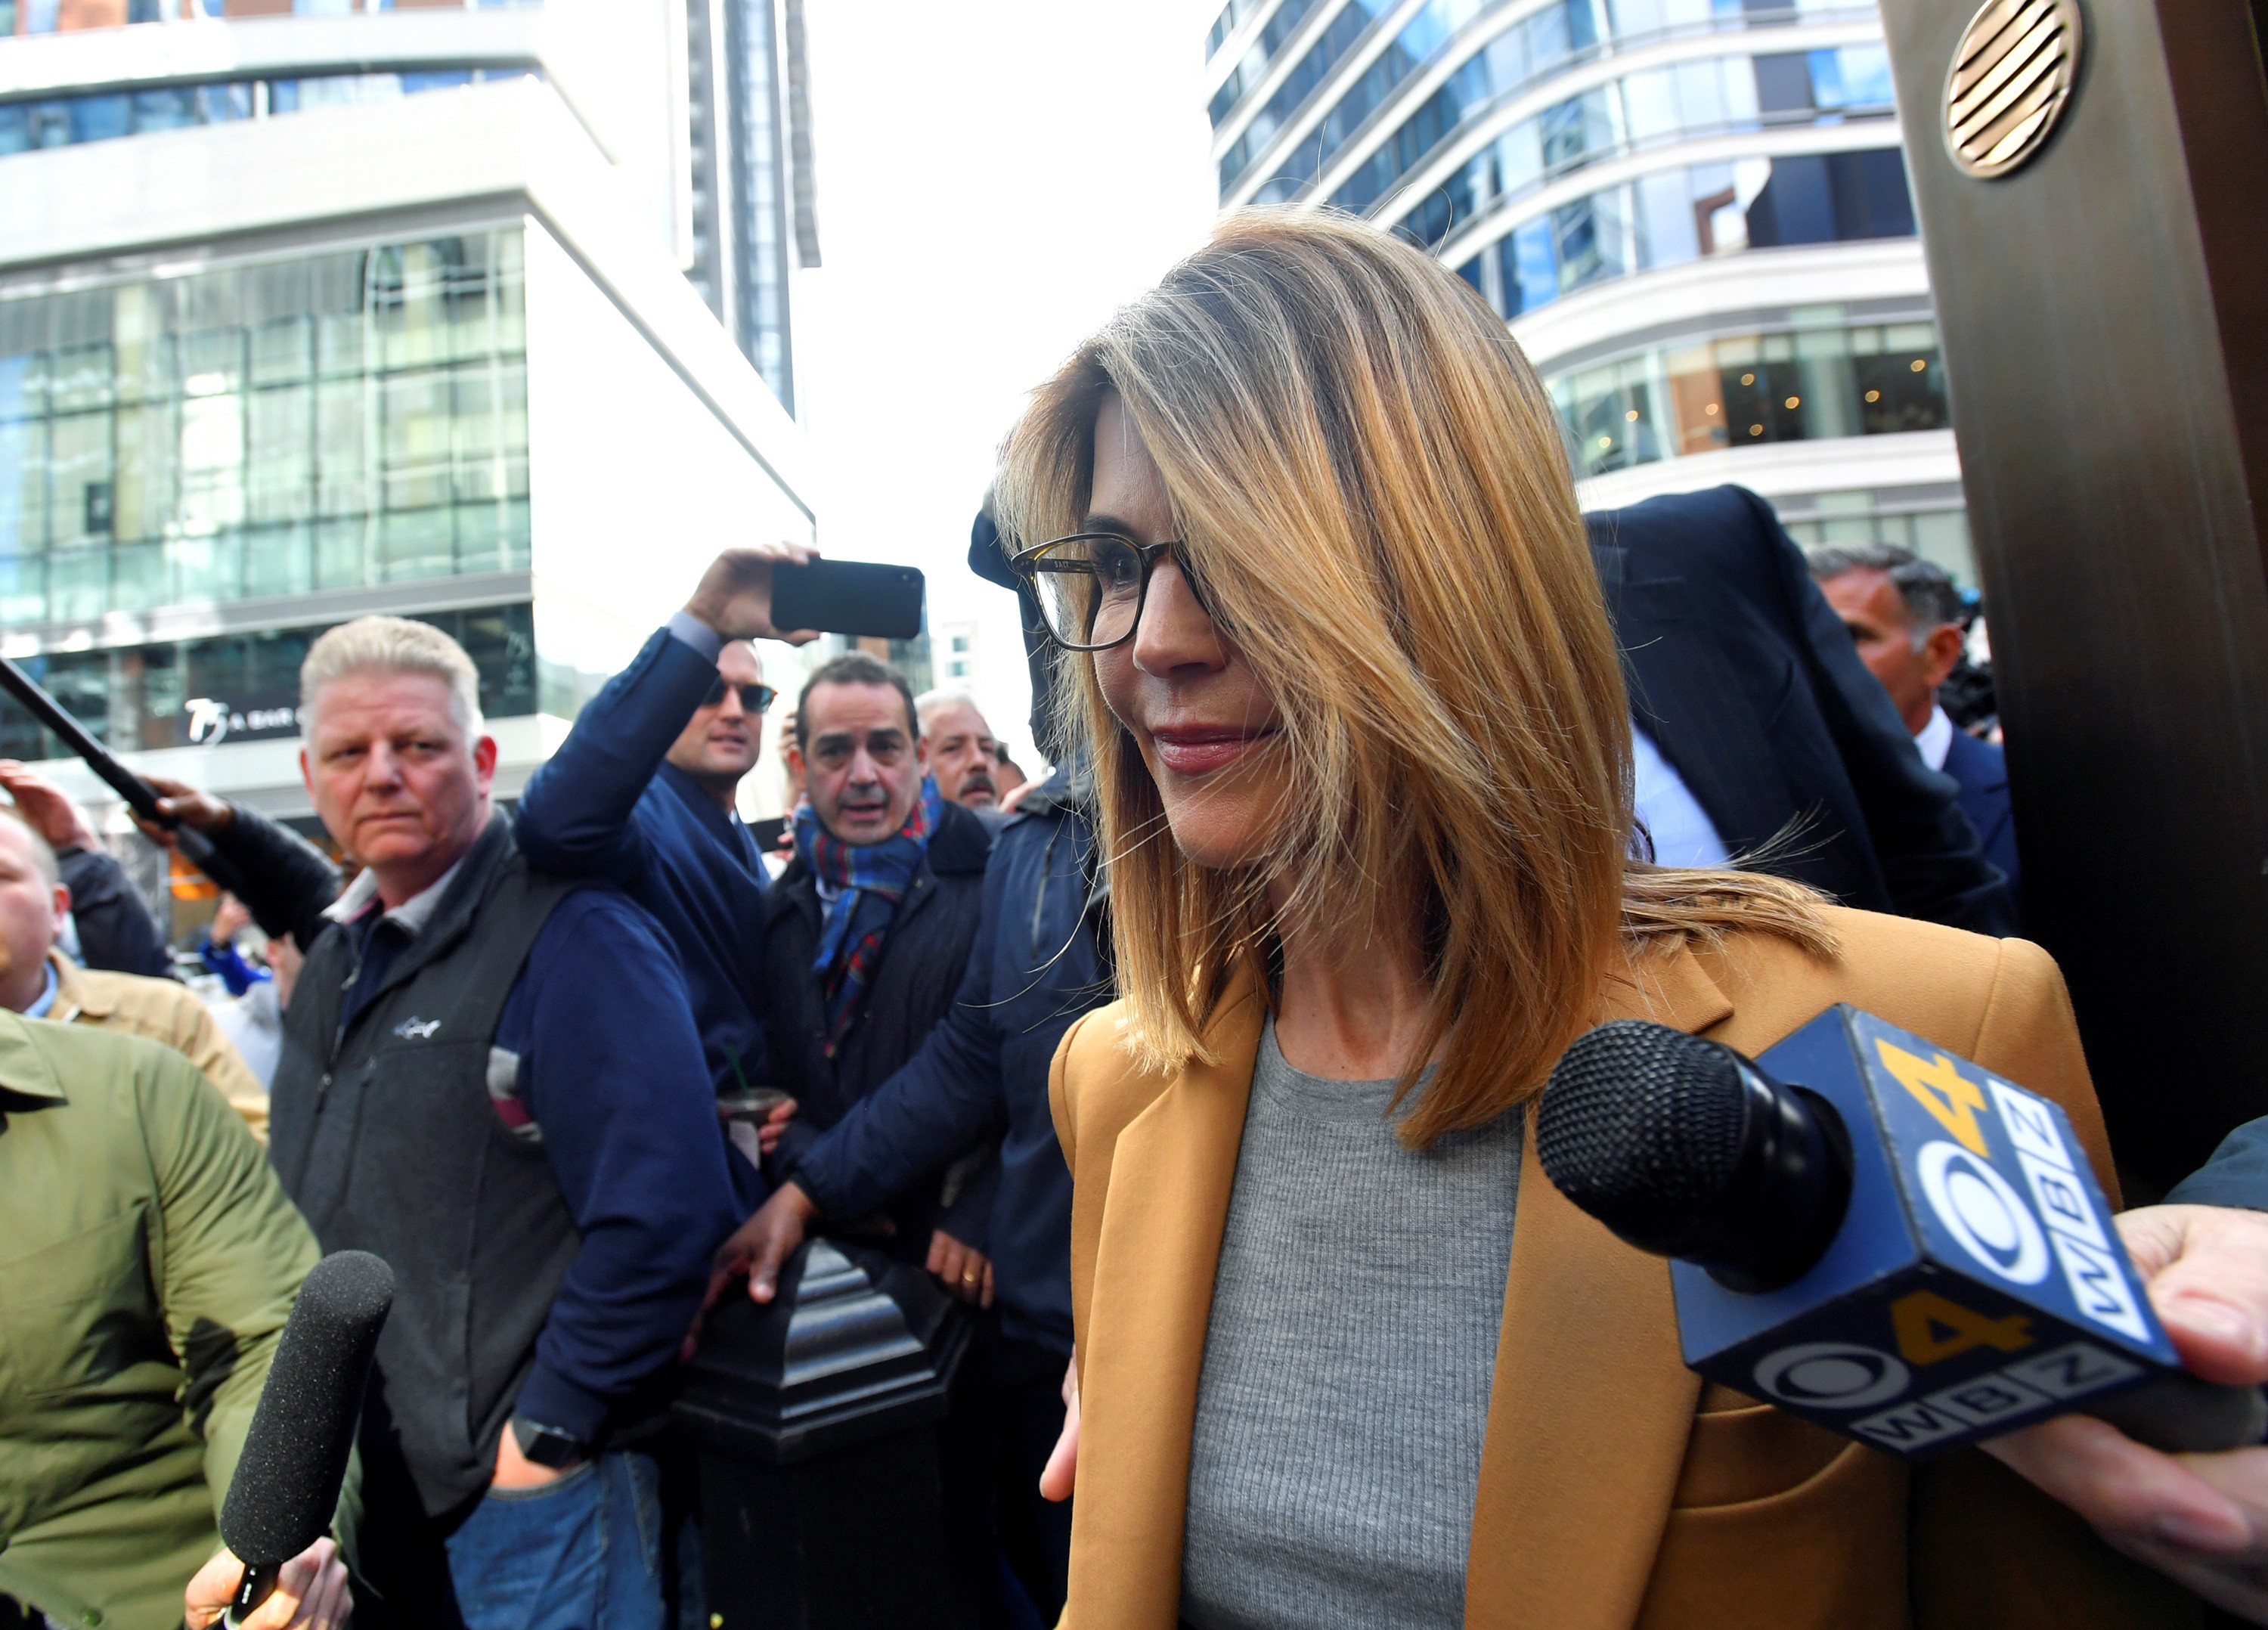 Lori Loughlin leaves the federal courthouse after facing charges in a nationwide college admissions cheating scheme in Boston, Massachusetts, on Wednesday. Photo: Reuters